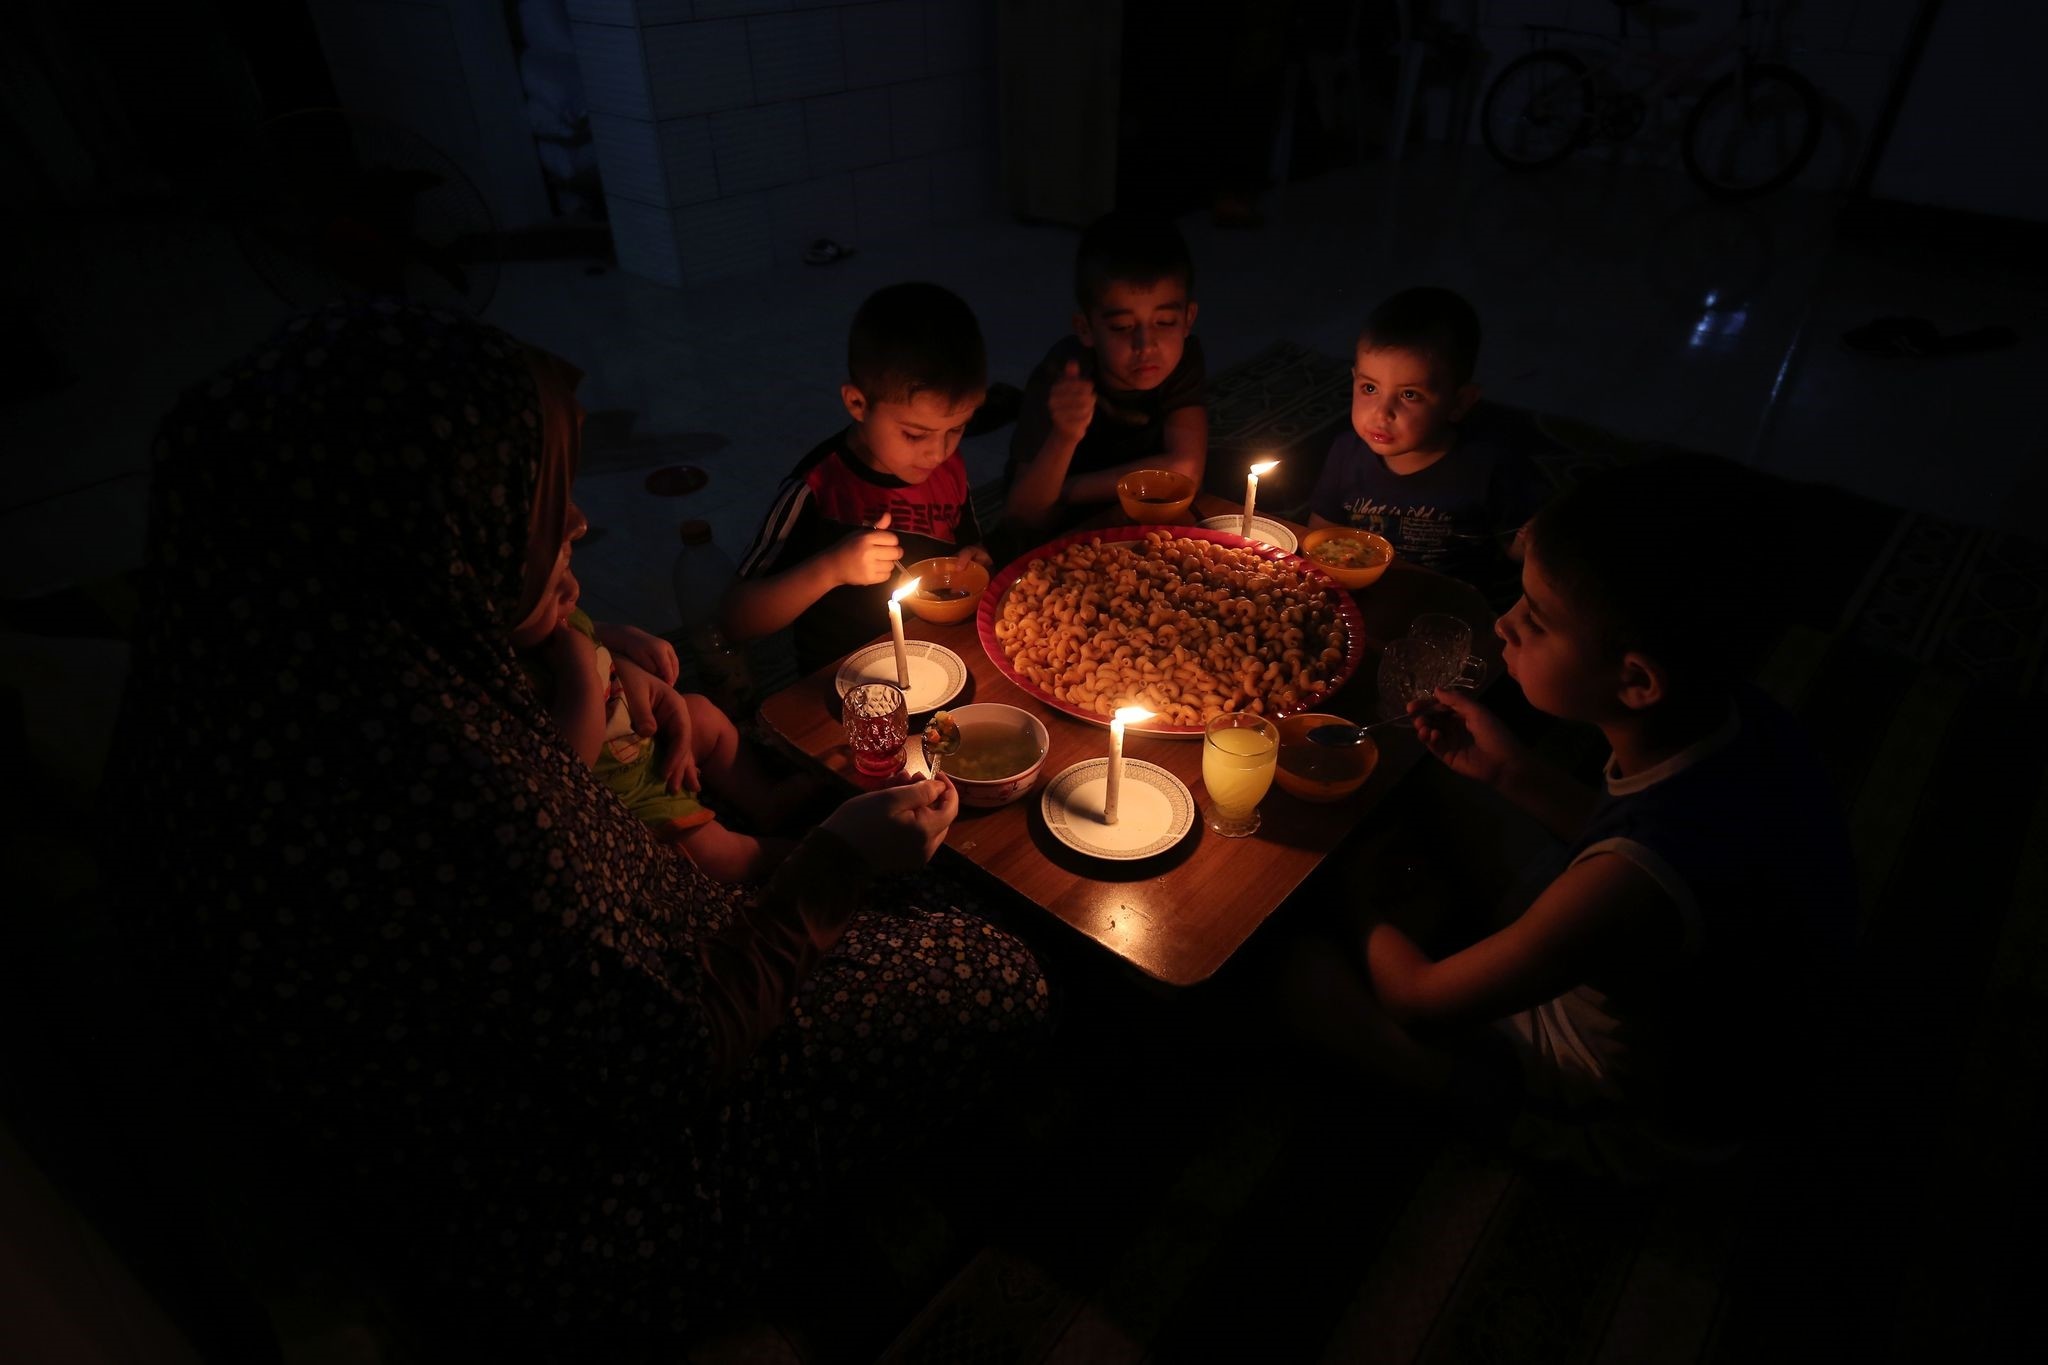 A palestinian family eats dinner by candlelight at their makeshift home in the Rafah refugee camp, in the southern Gaza Strip, during a power outage on June 11, 2017. (AFP PHOTO)